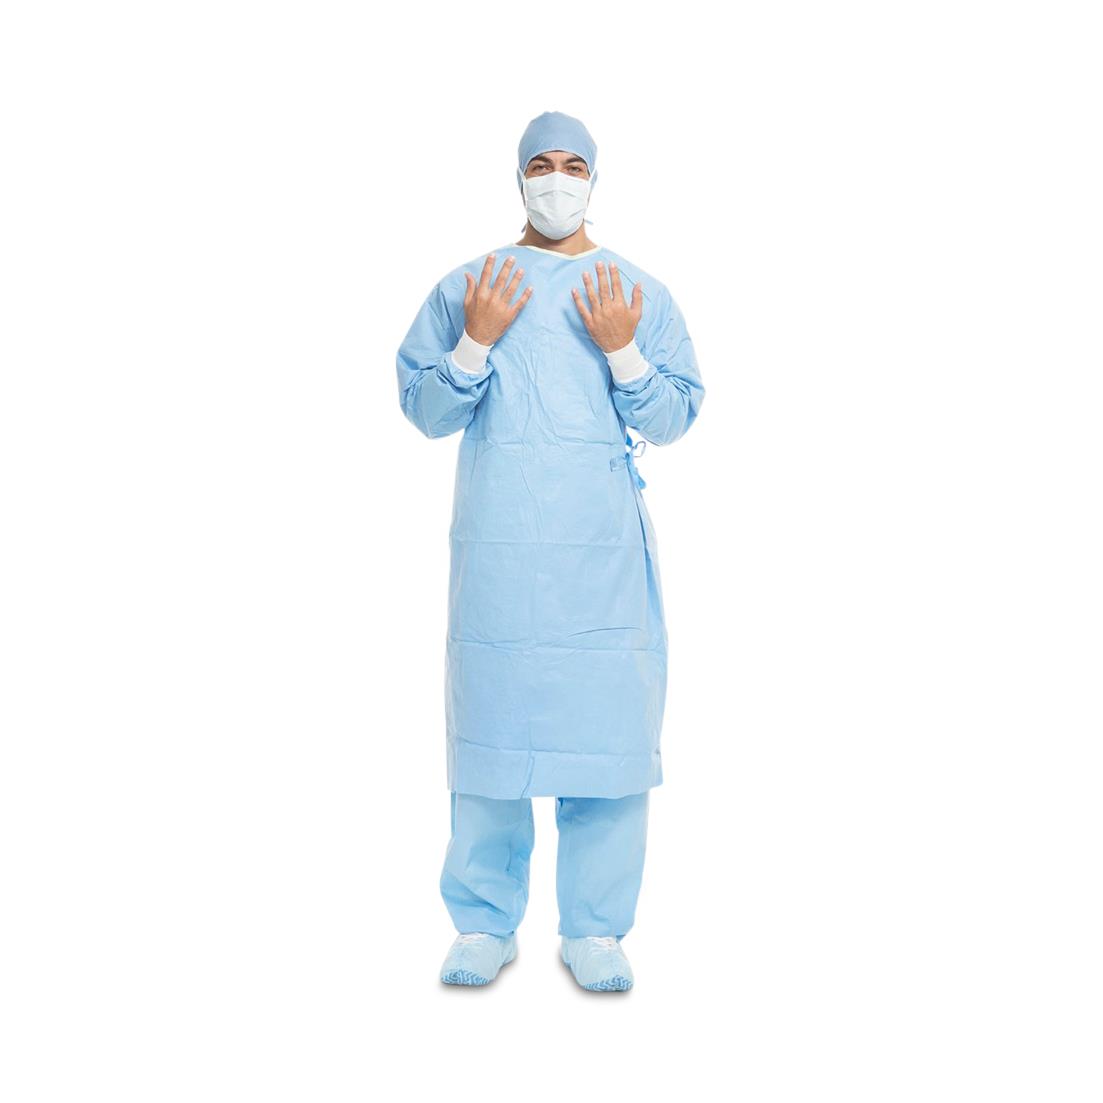 Aero Blue Performance Surgical Gowns | Medline Industries, Inc.